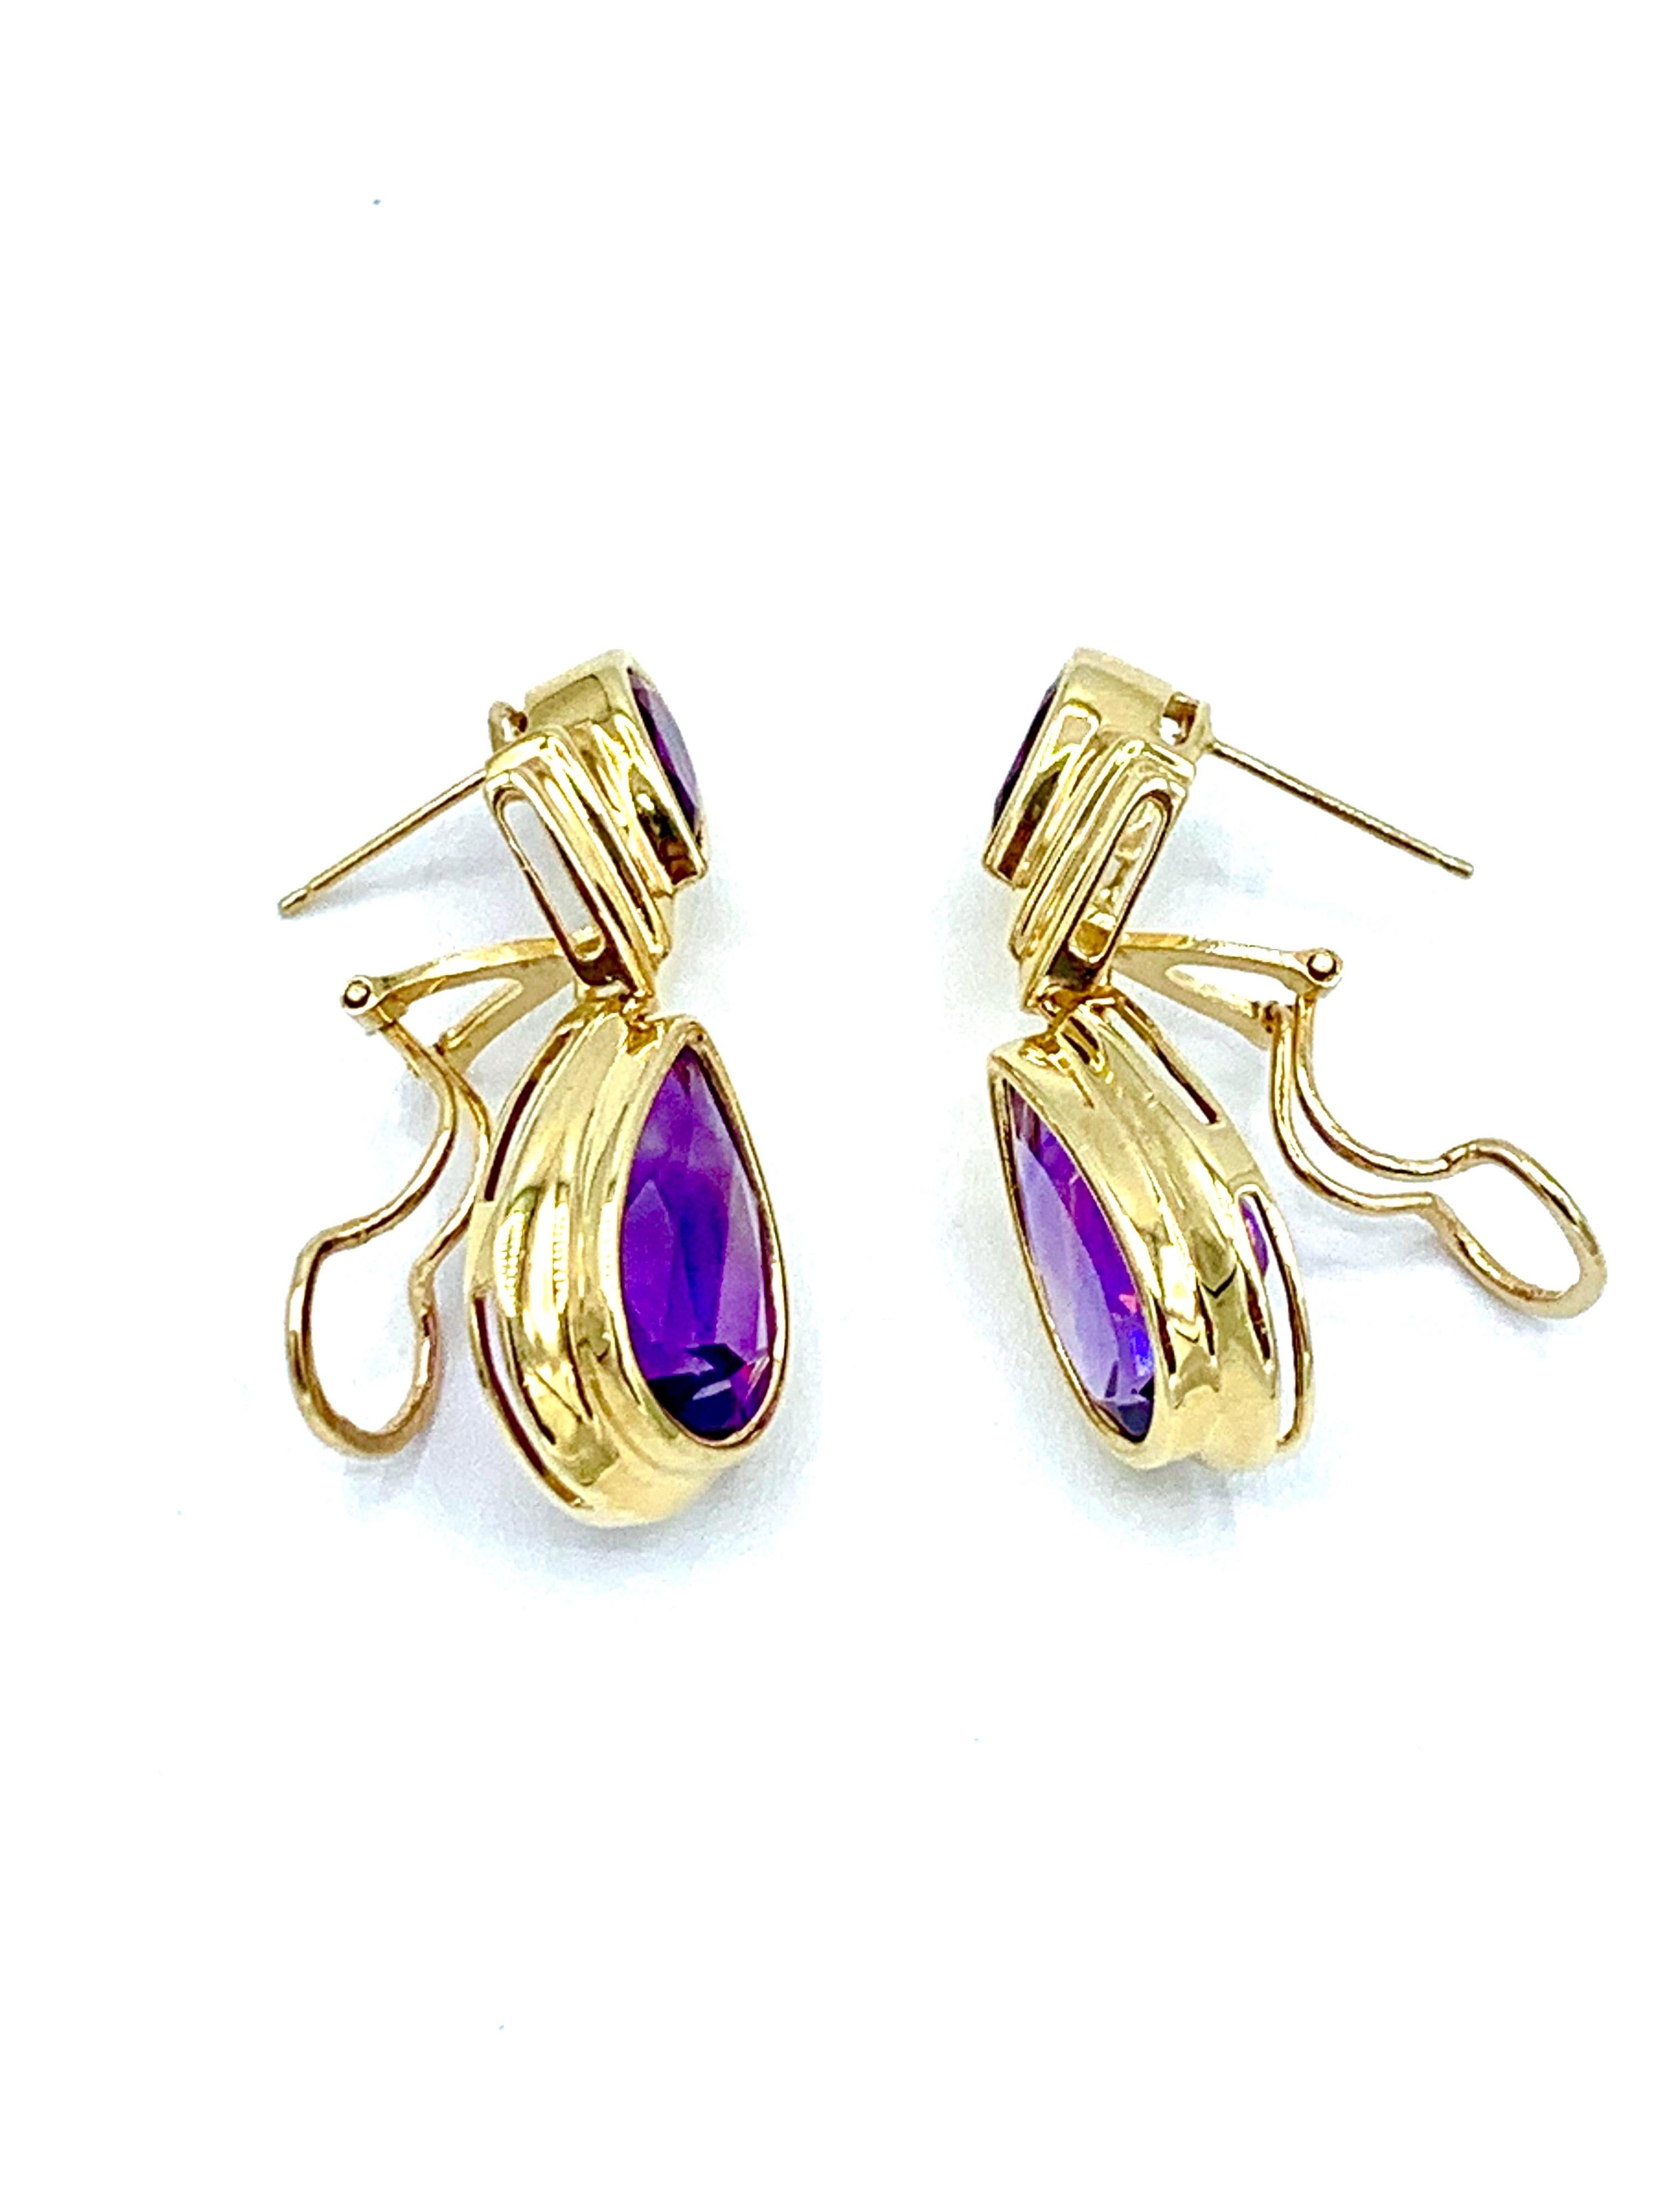 A beautiful pair of Amethyst earrings.  Each earring features two bezel set pear shape Amethyst .  The Amethysts weigh 11.32 carats total, and the earrings feature an omega back with a post.  These measure 1.20 inches in length.  Offered by Charles